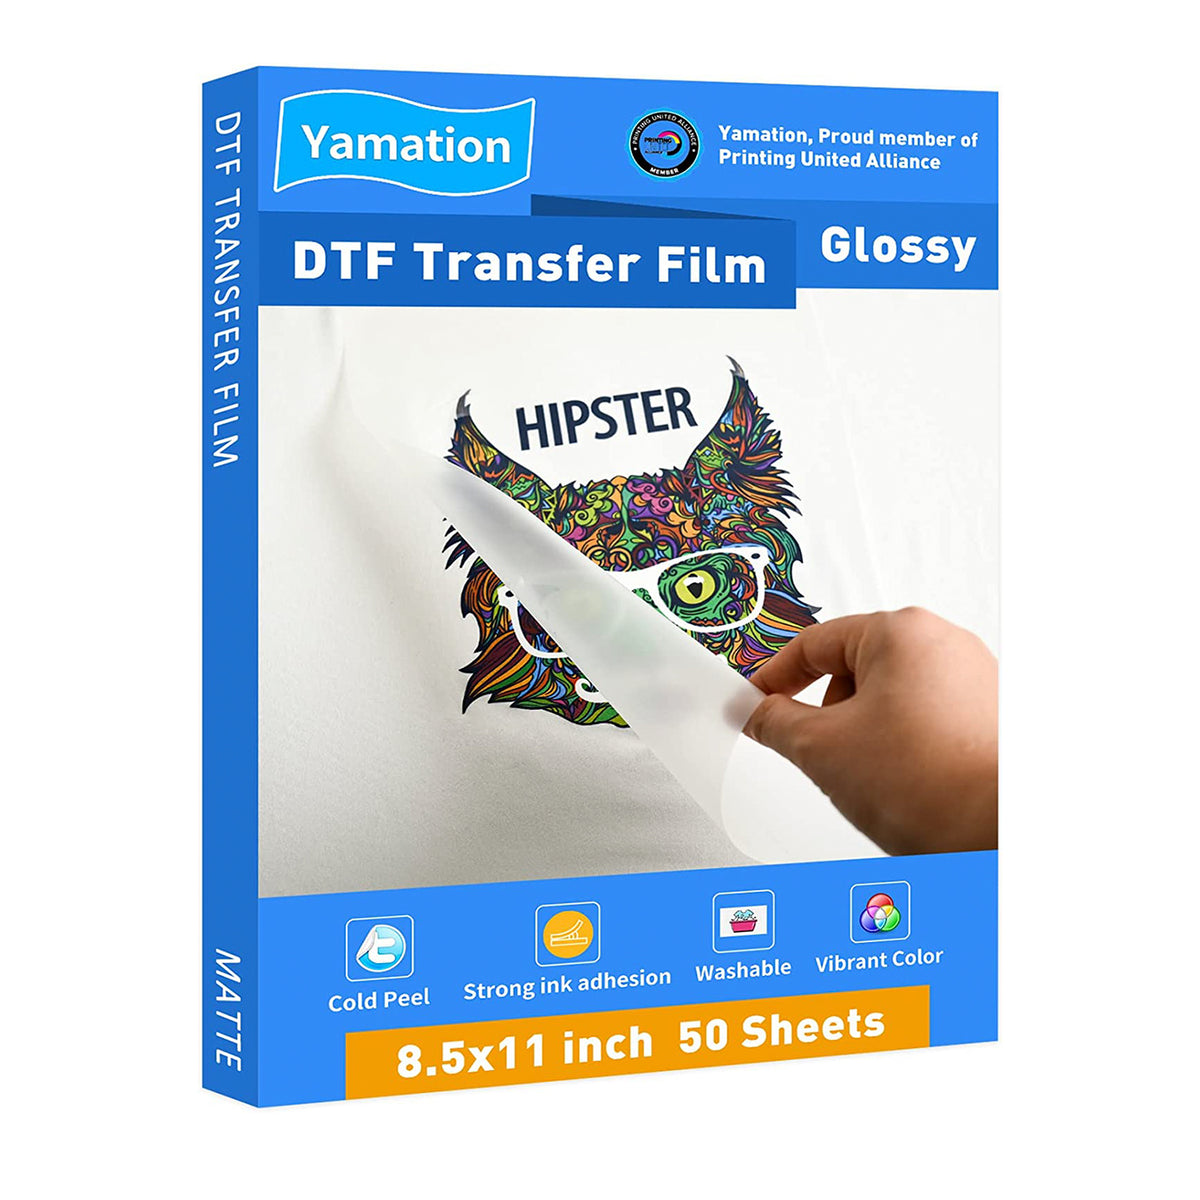 Yamation DTF Film - Glossy (8.5 x 11) - 50 Sheets